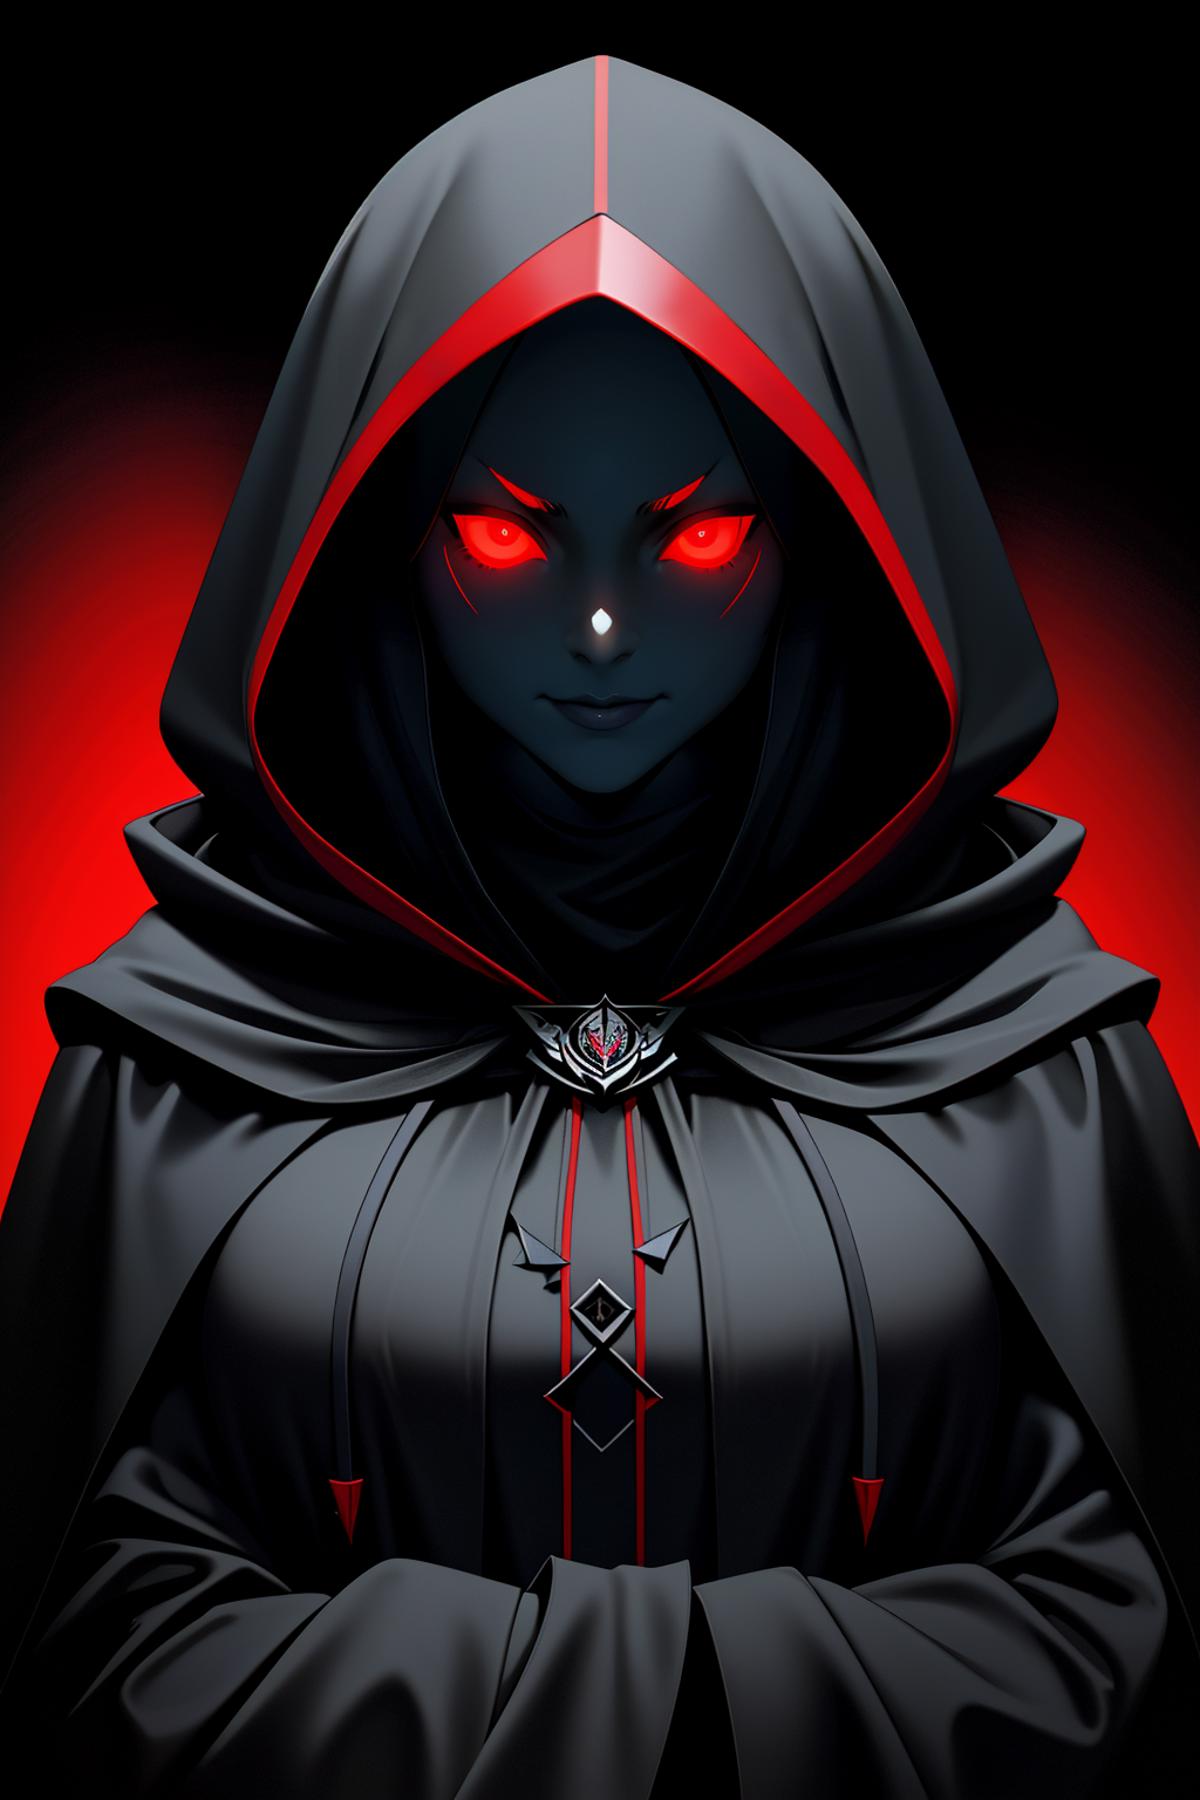 Cultist Hood - by EDG image by EDG